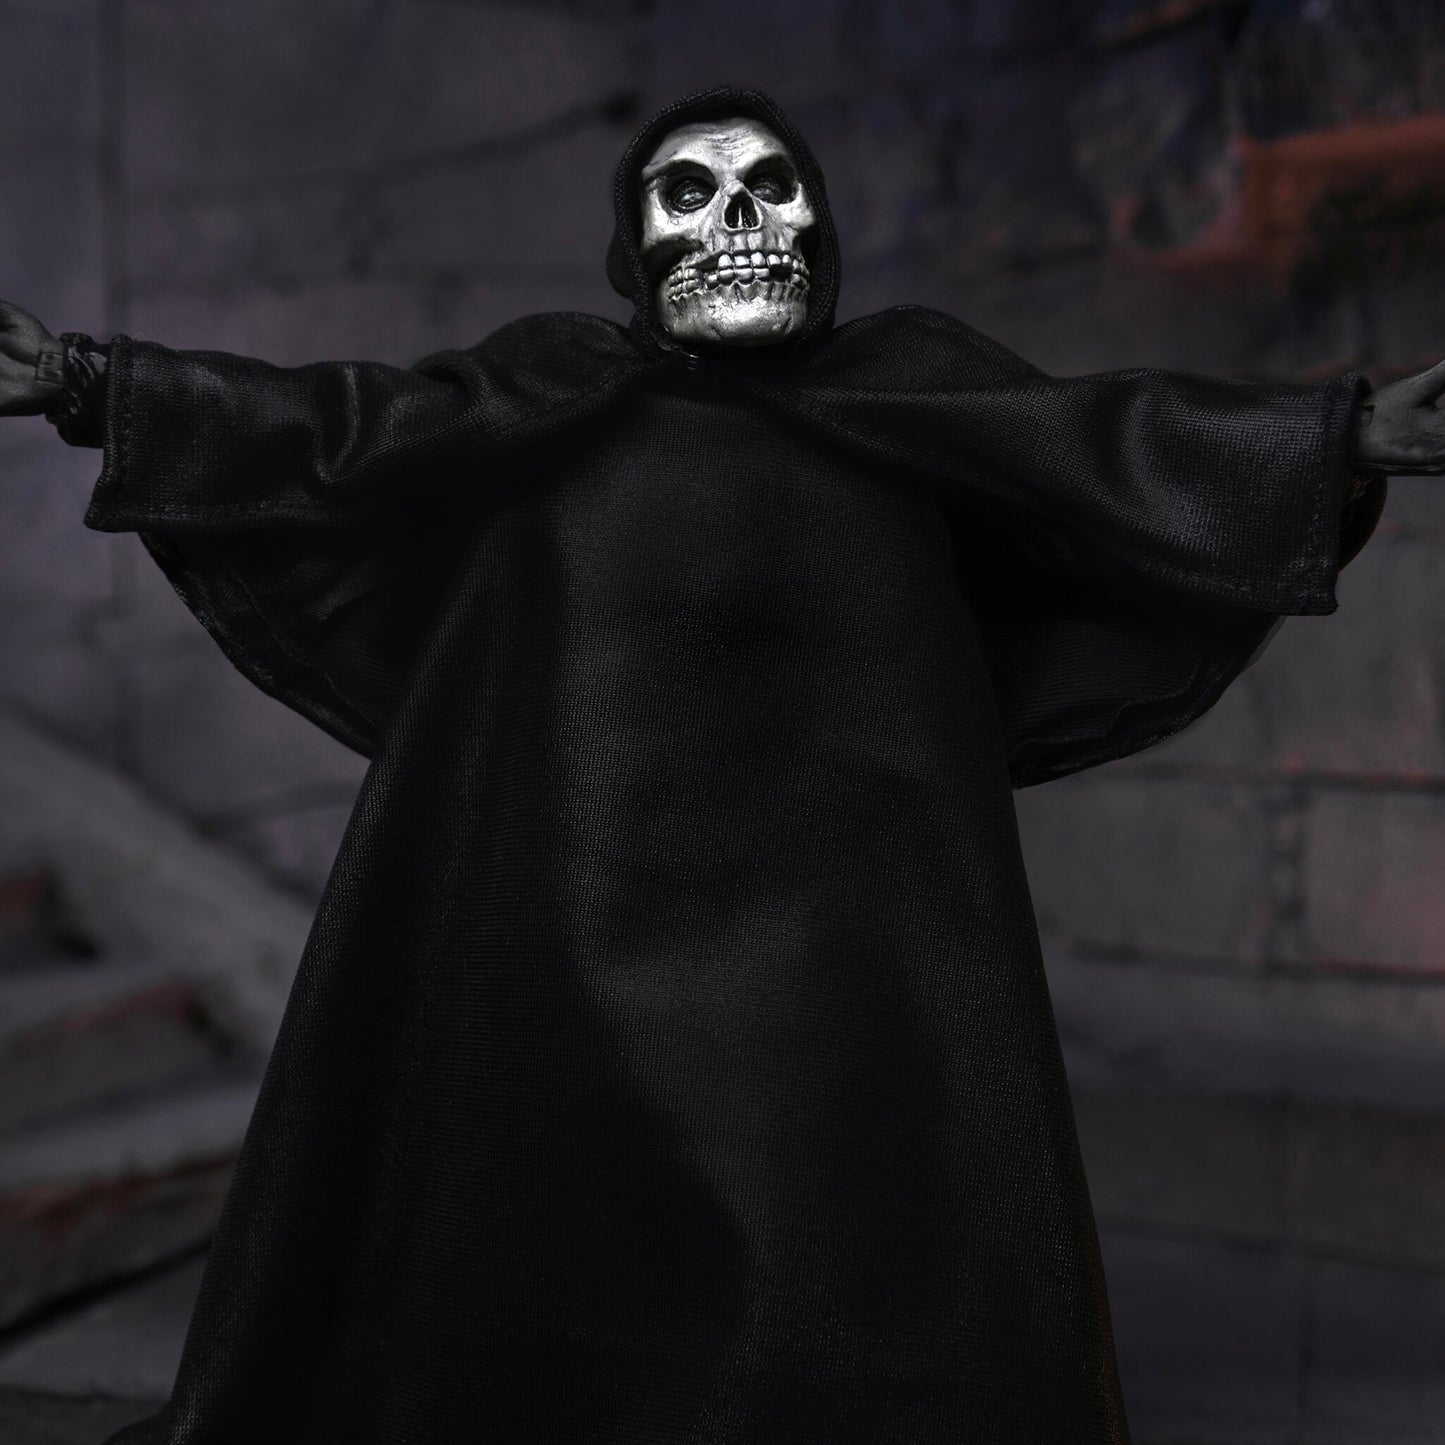 NECA: The Misfits - Ultimate Fiend 7" Tall Action Figure